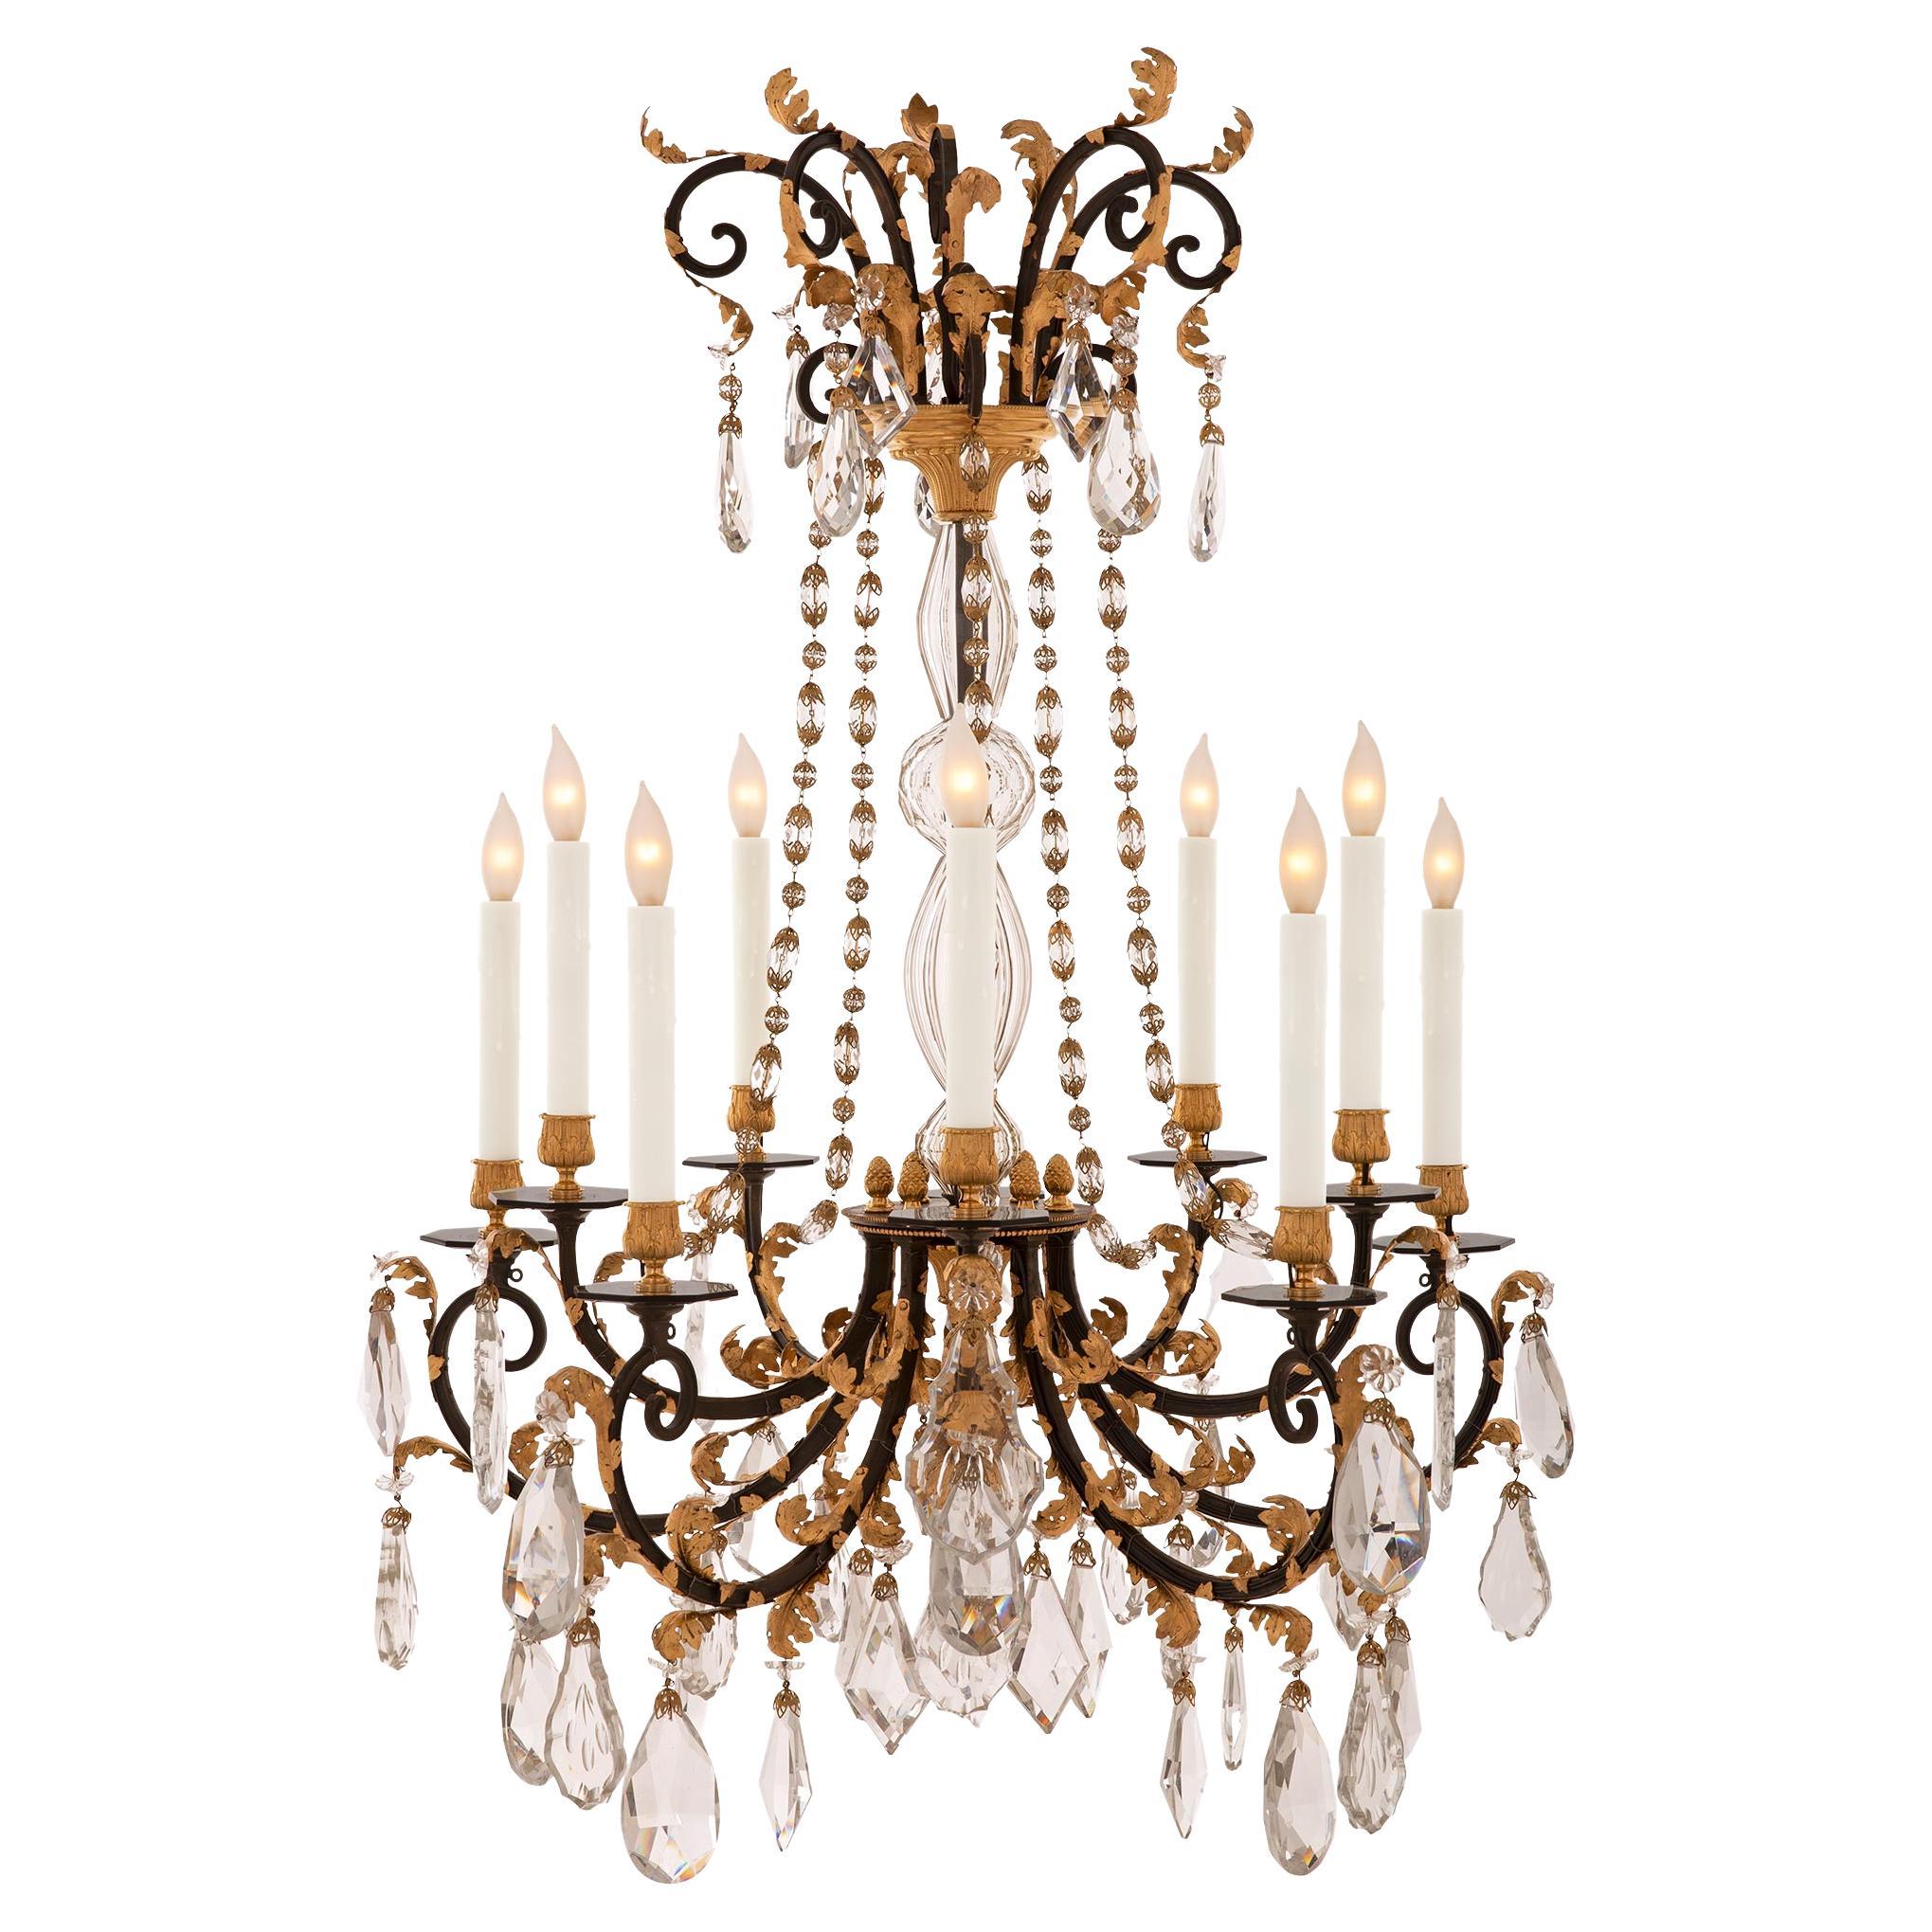 French 19th Century Louis XVI St. Crystal, Ormolu, and Wrought Iron Chandelier